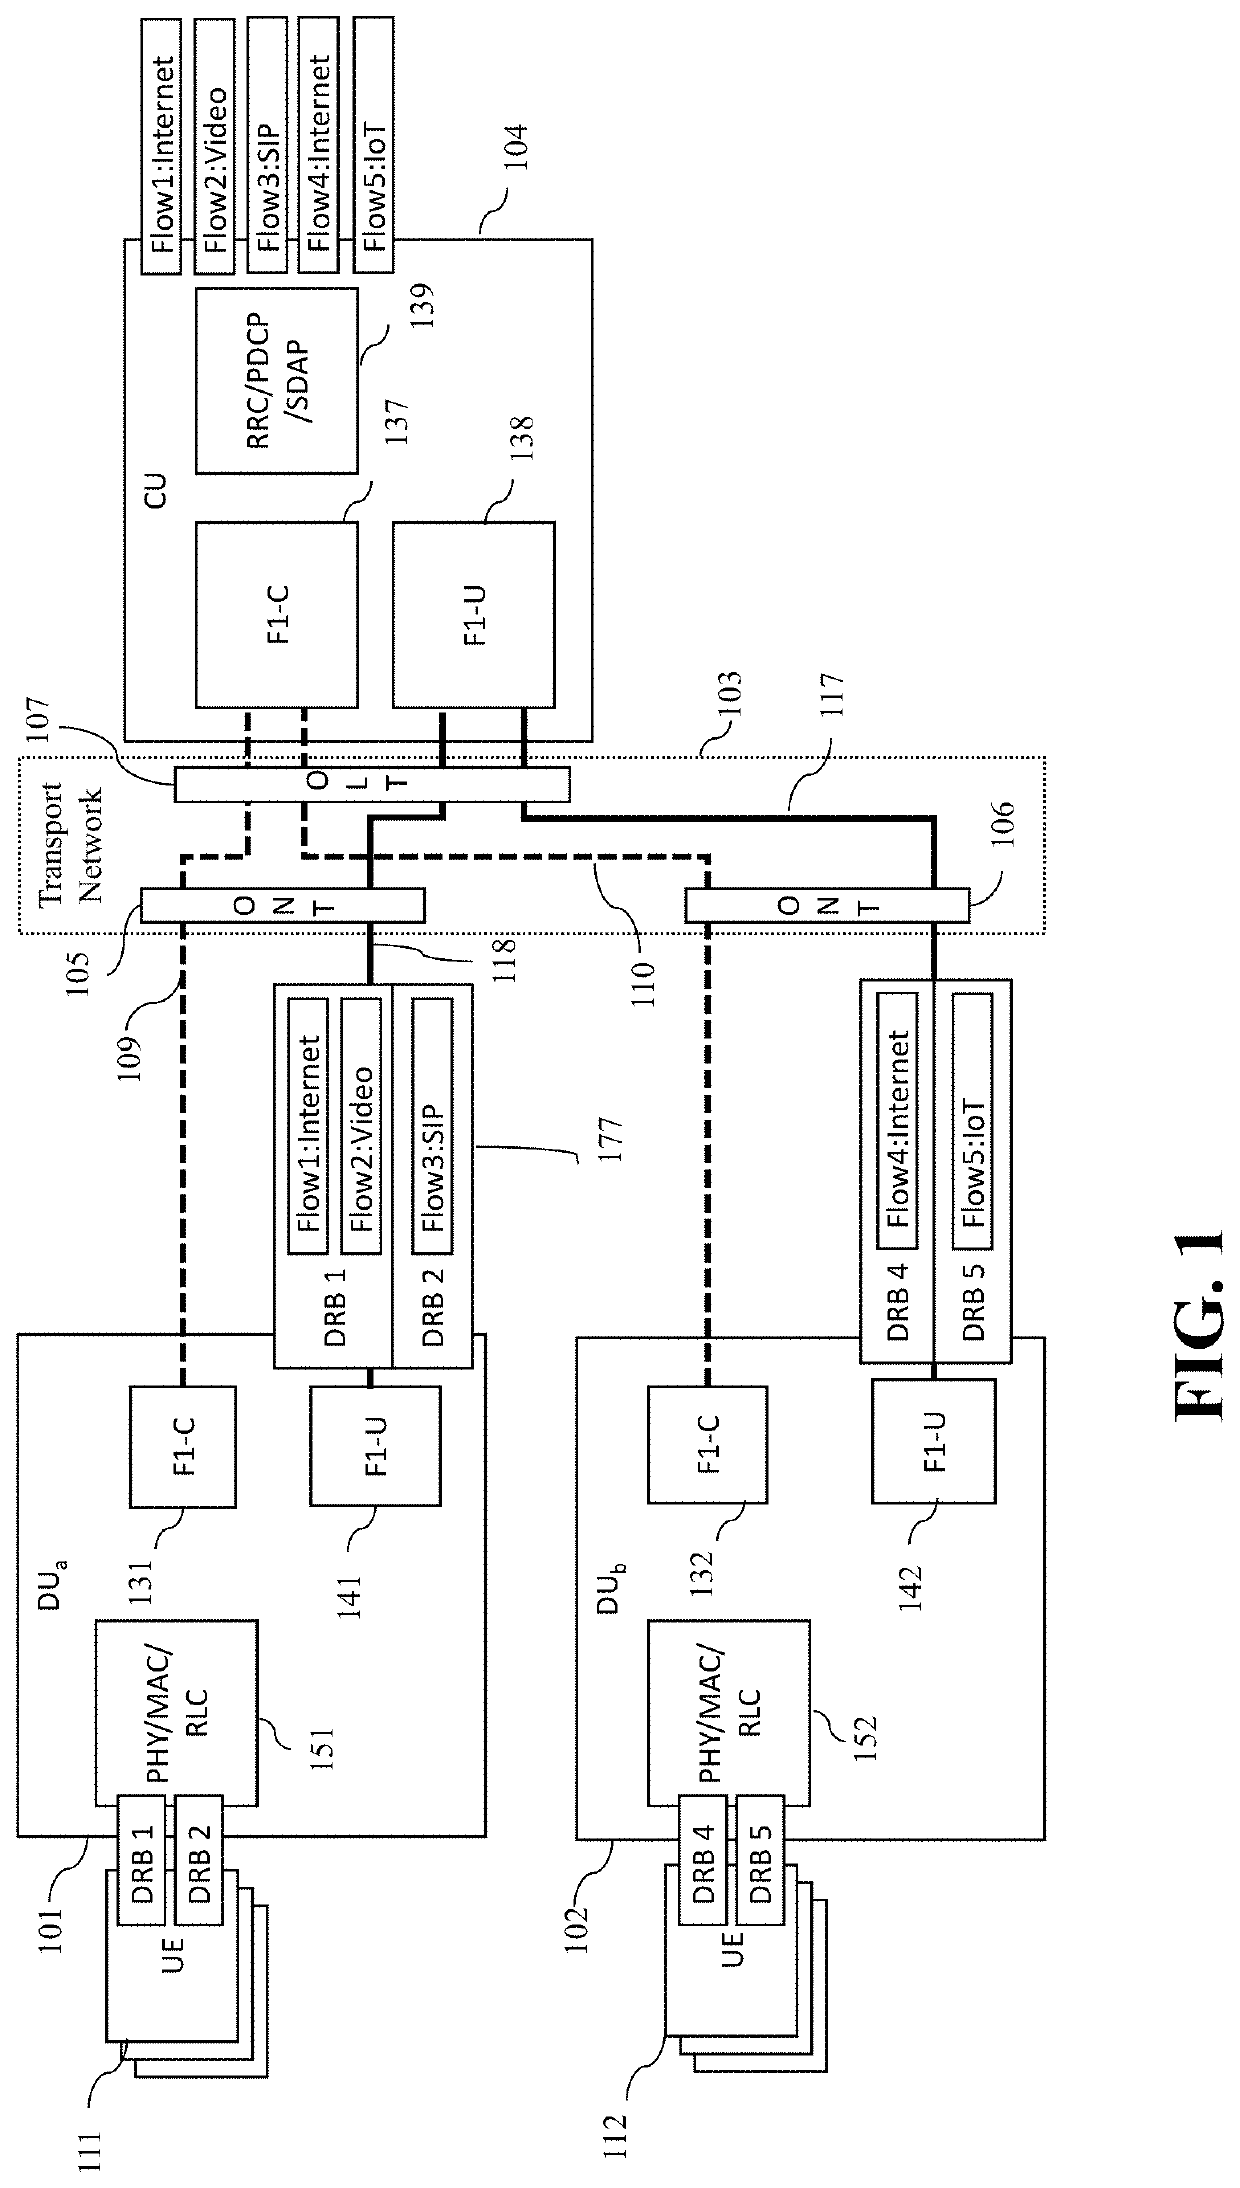 APPARATUS AND METHOD FOR QoS AWARE GTP-U TRANSPORT IN MOBILE NETWORKS